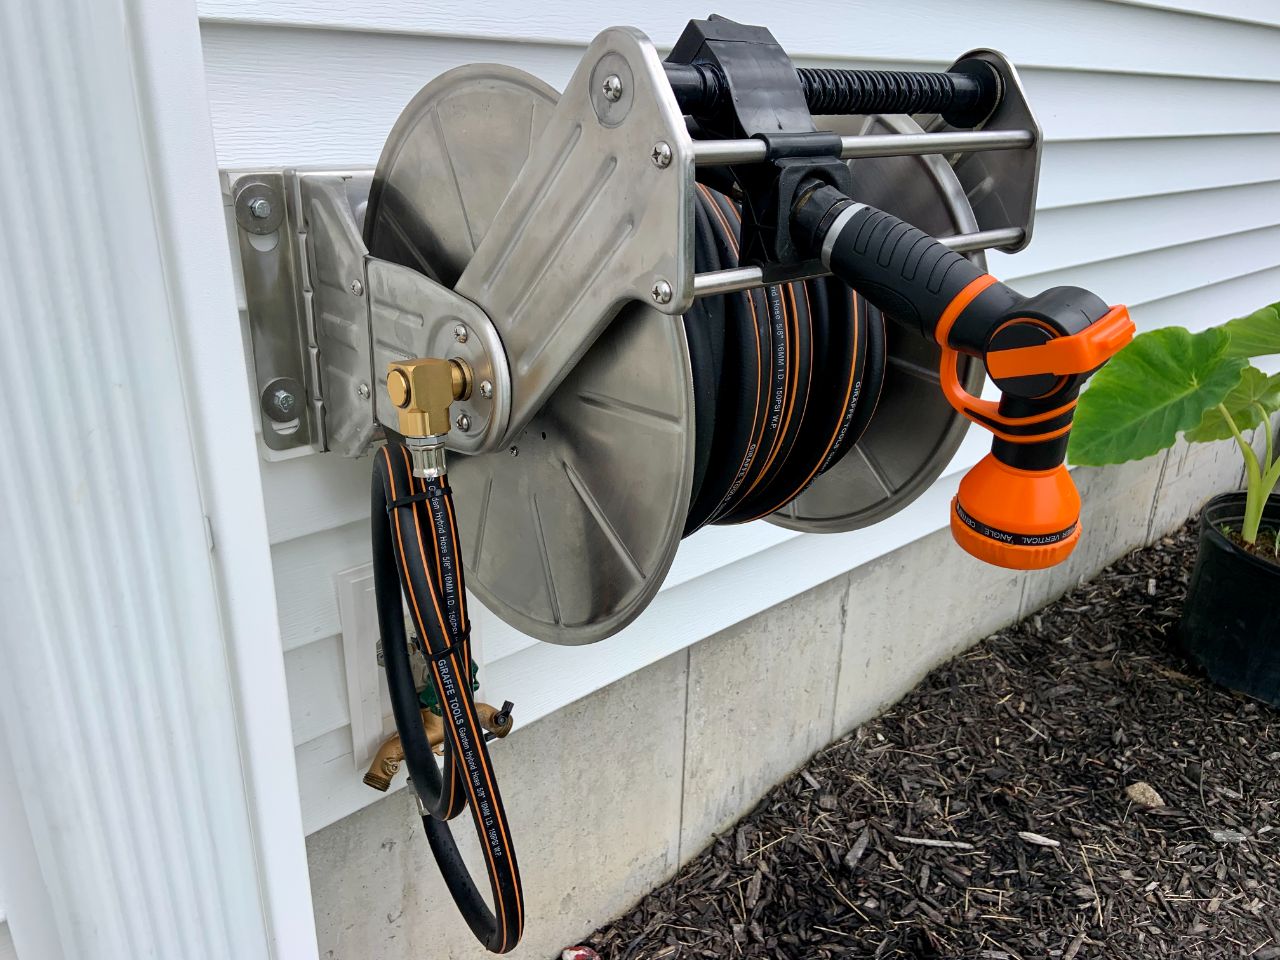 Garden hose reels with secured nozzles?